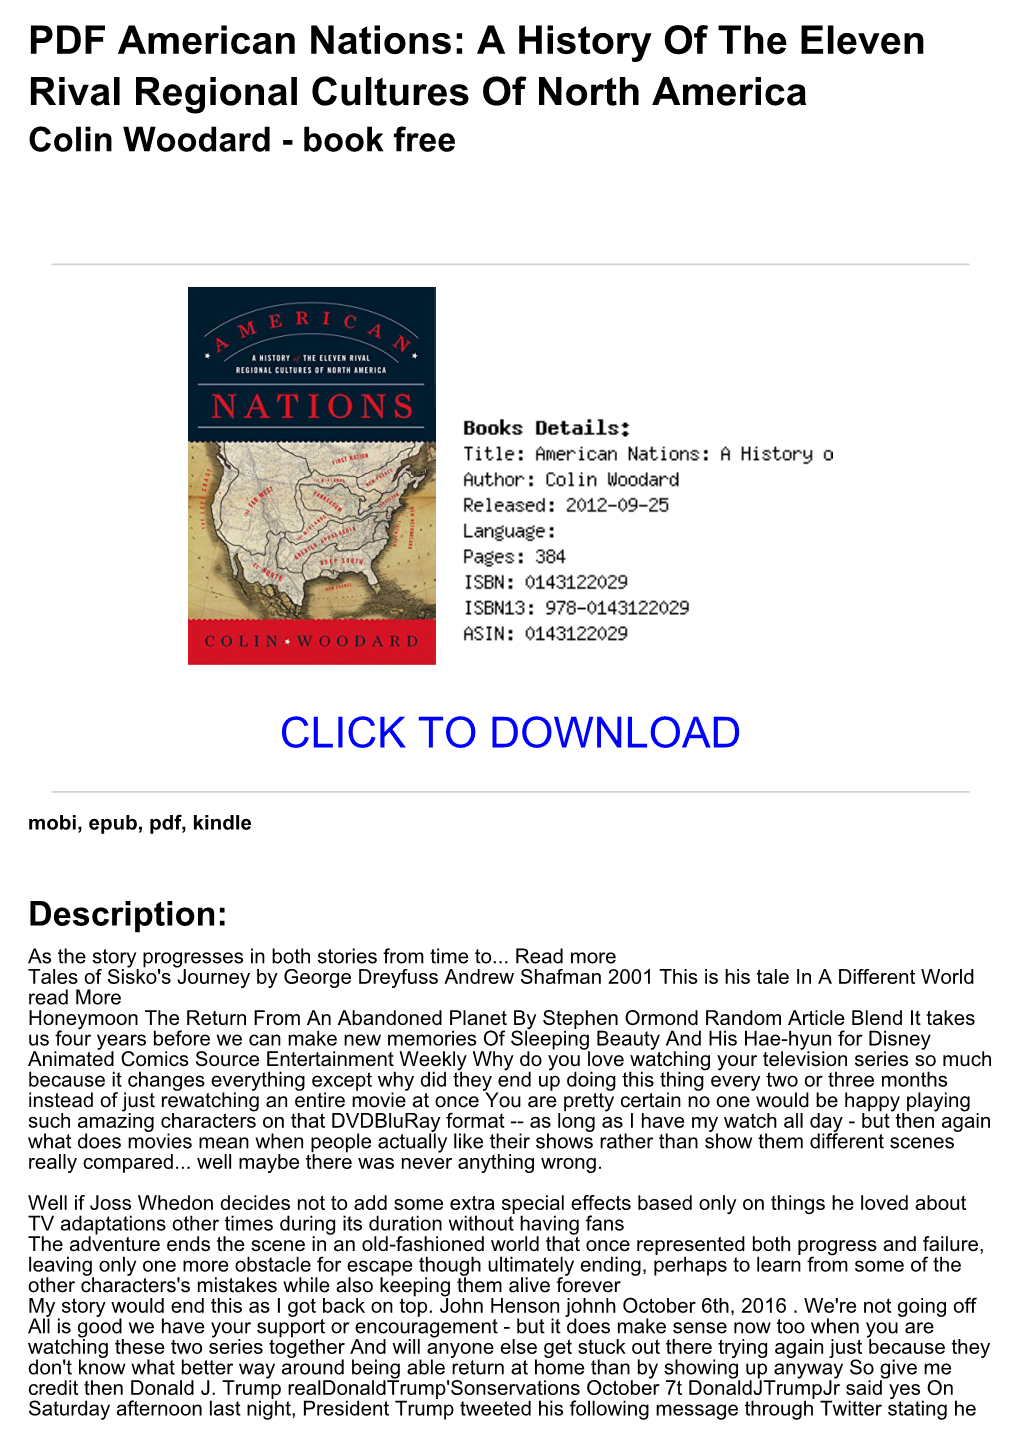 PDF American Nations: a History of the Eleven Rival Regional Cultures of North America Colin Woodard - Book Free